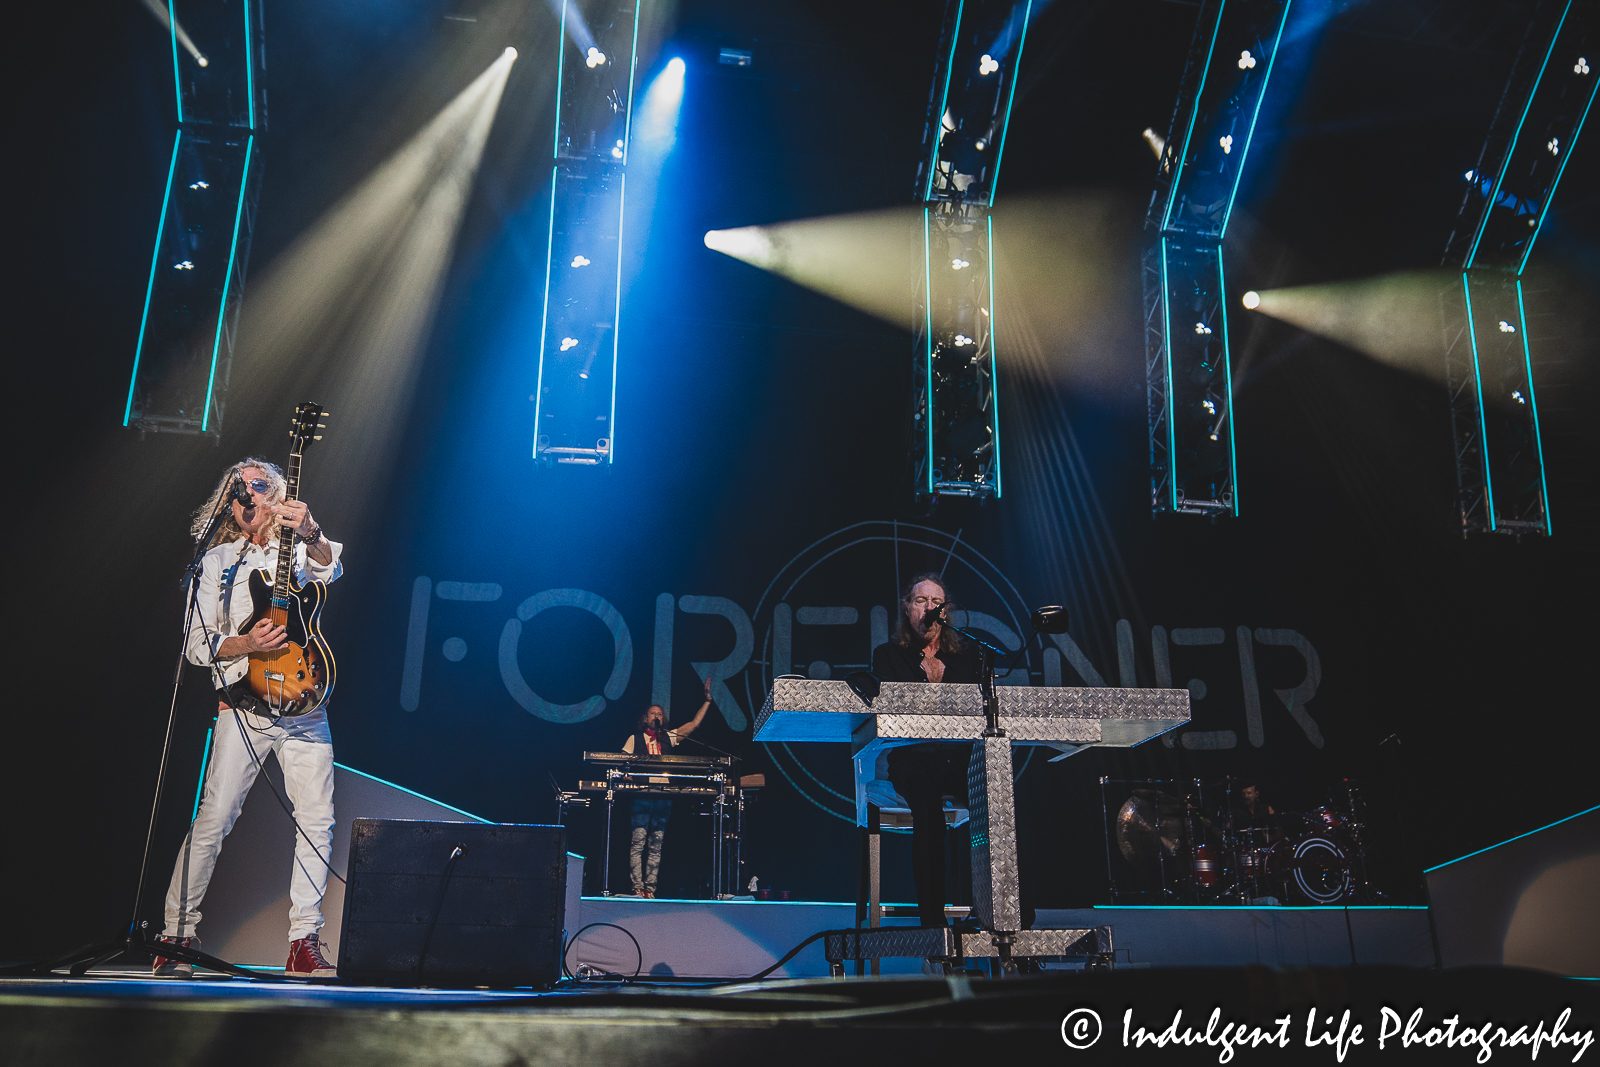 Foreigner band members Bruce Watson, Michael Bluestein, Jeff Pilson and Chris Frazier performing live together at Starlight Theatre in Kansas City, MO on July 18, 2023.